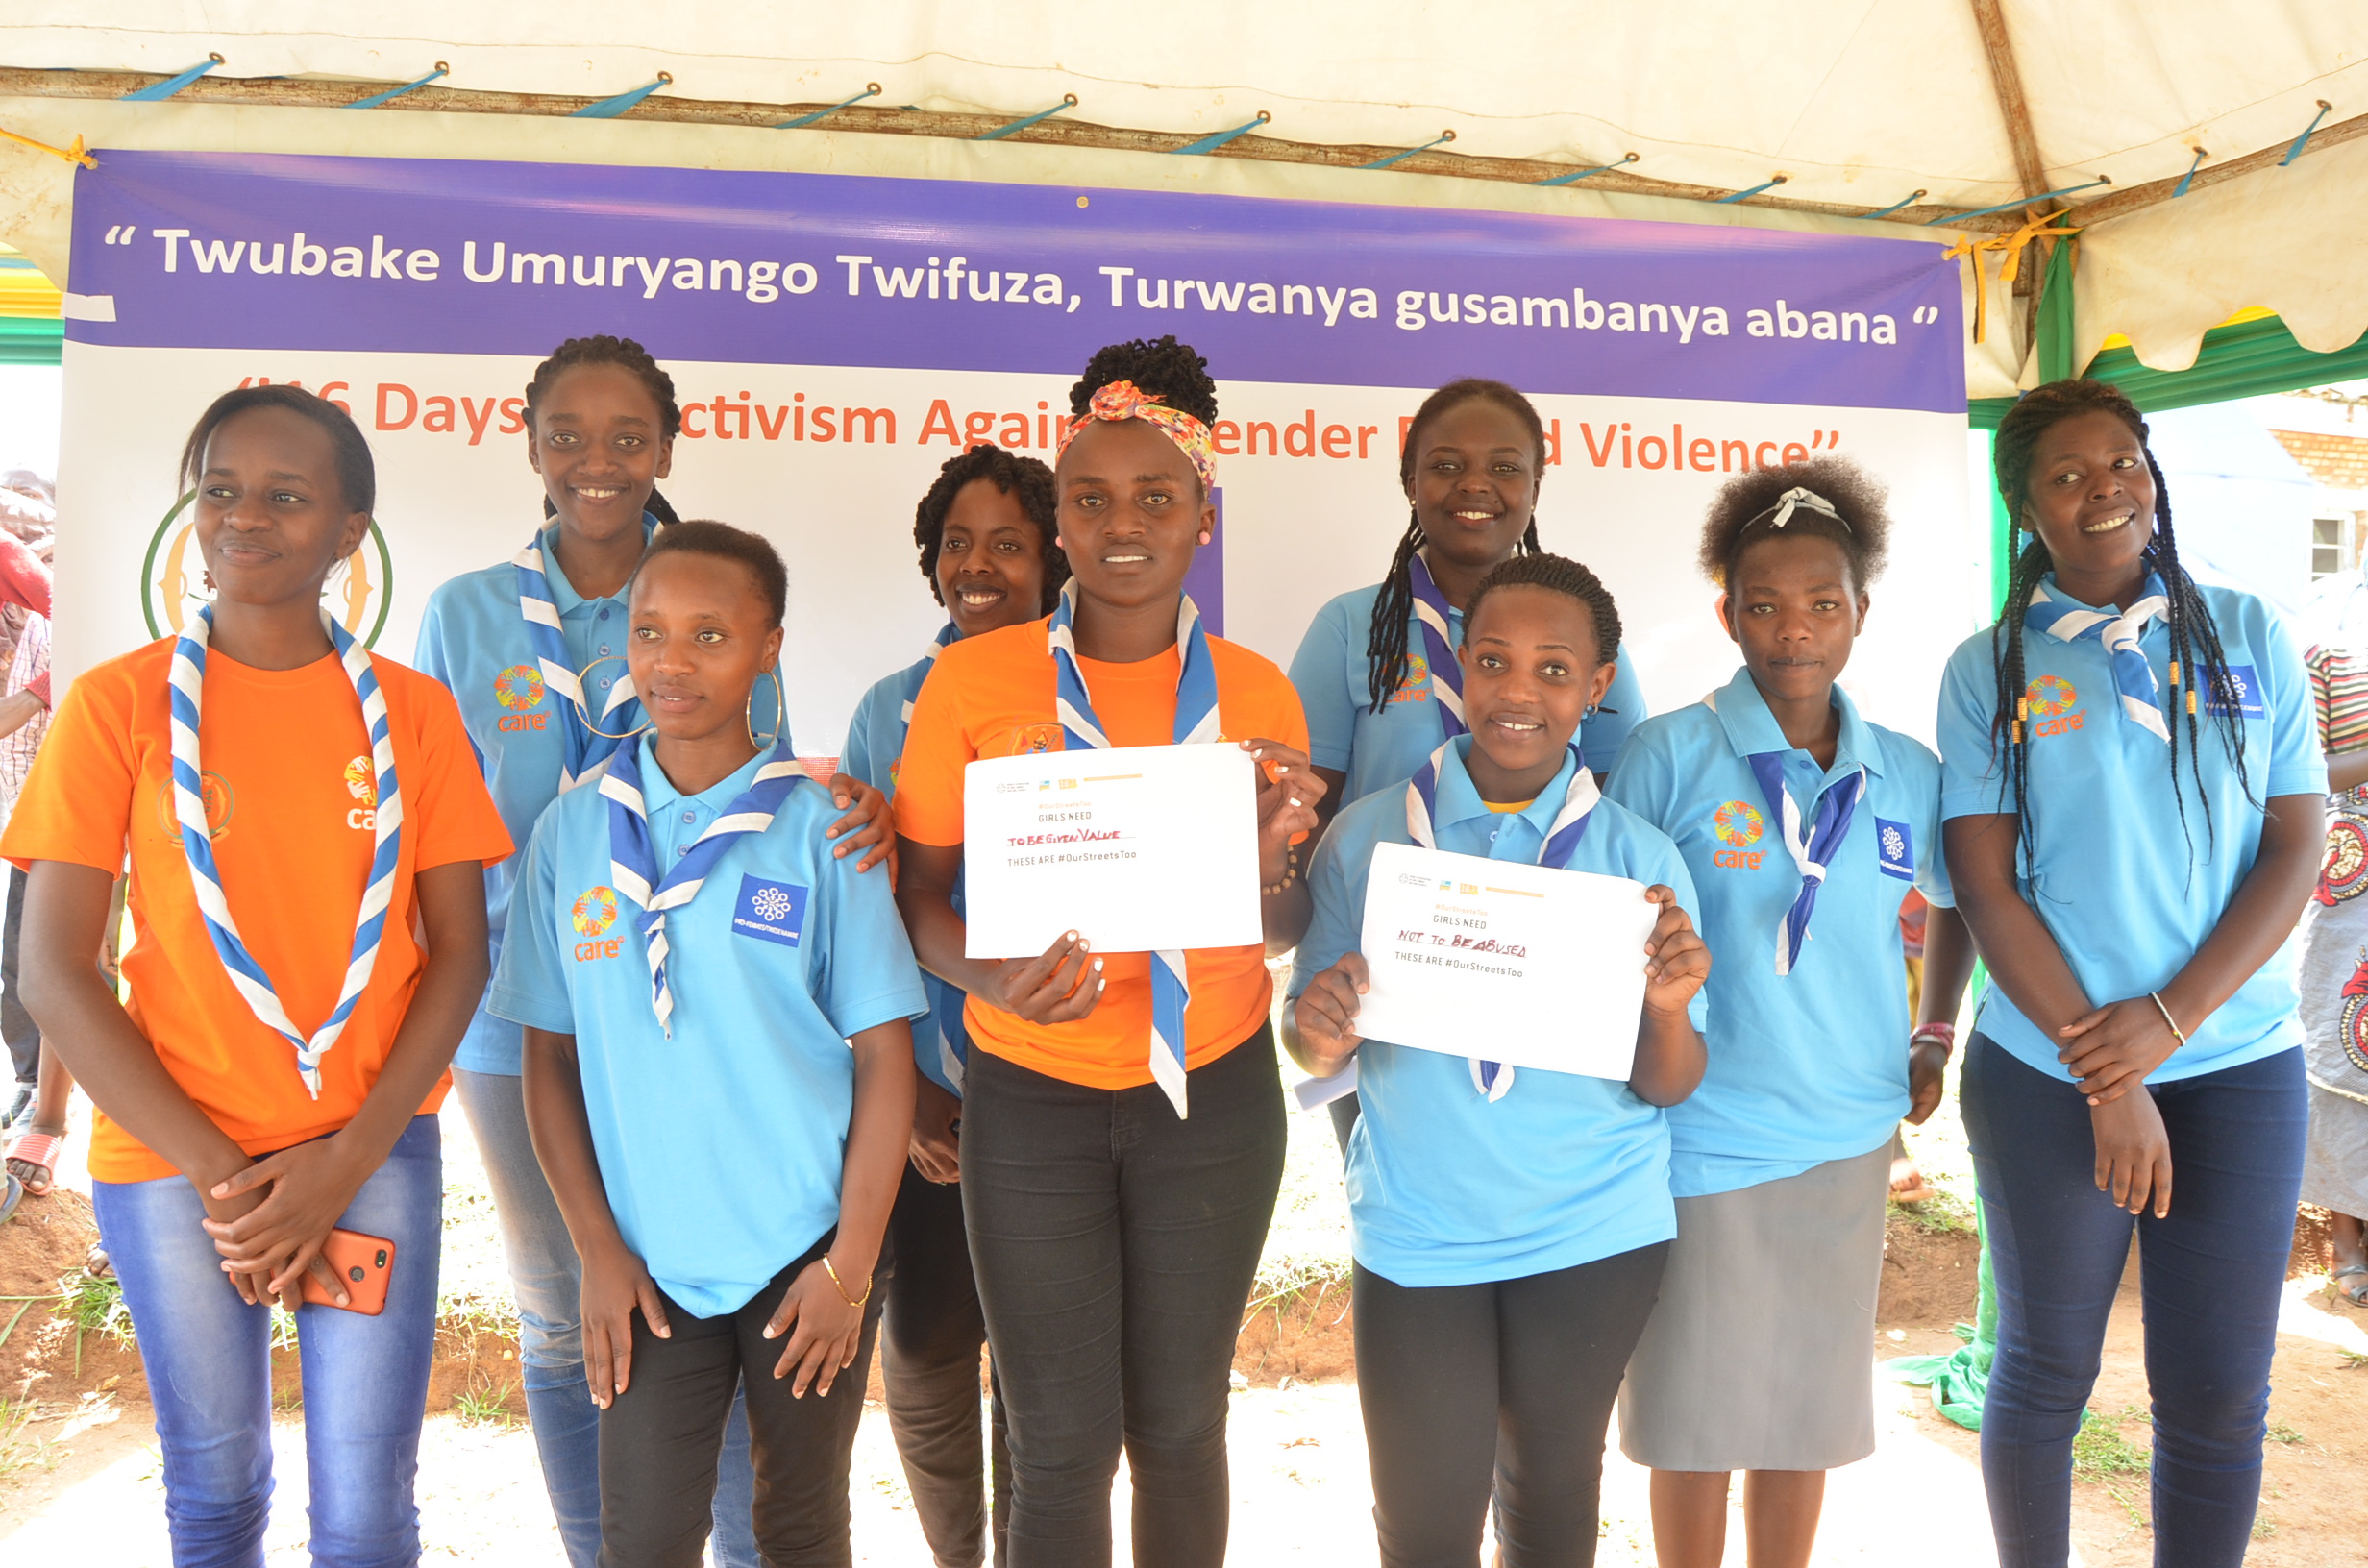 YOUTH AT THE FOREFRONT AGAINST GBV